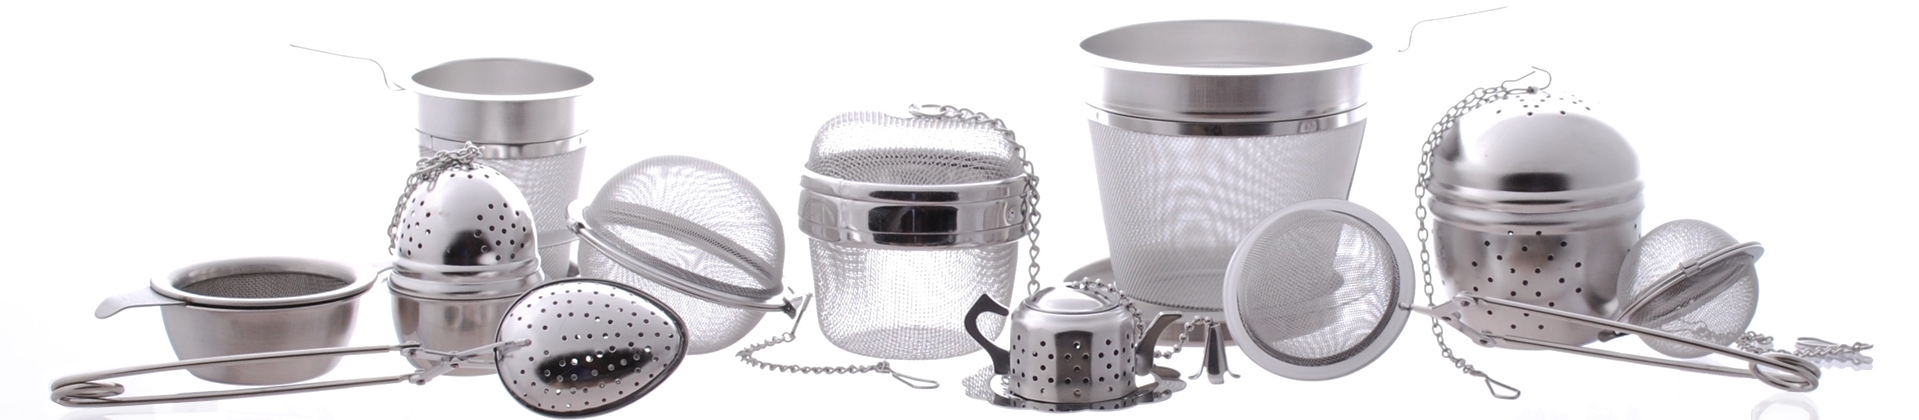 Tea Infusers, Strainers & Filters - Cup of Tea